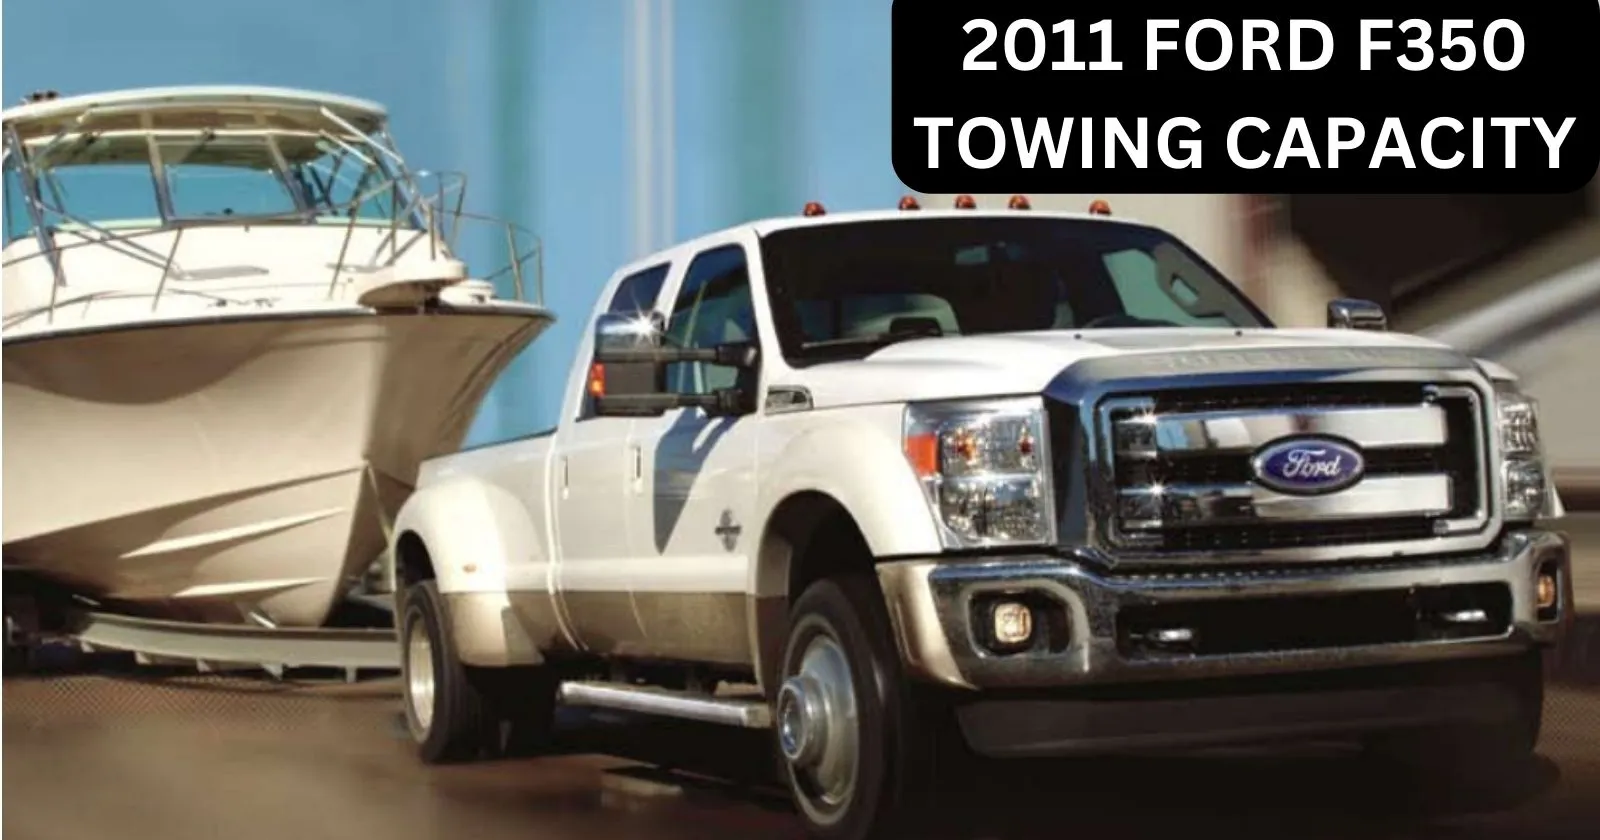 explore-2011-ford-f350-towing-capacity-with-chart-thecartowing